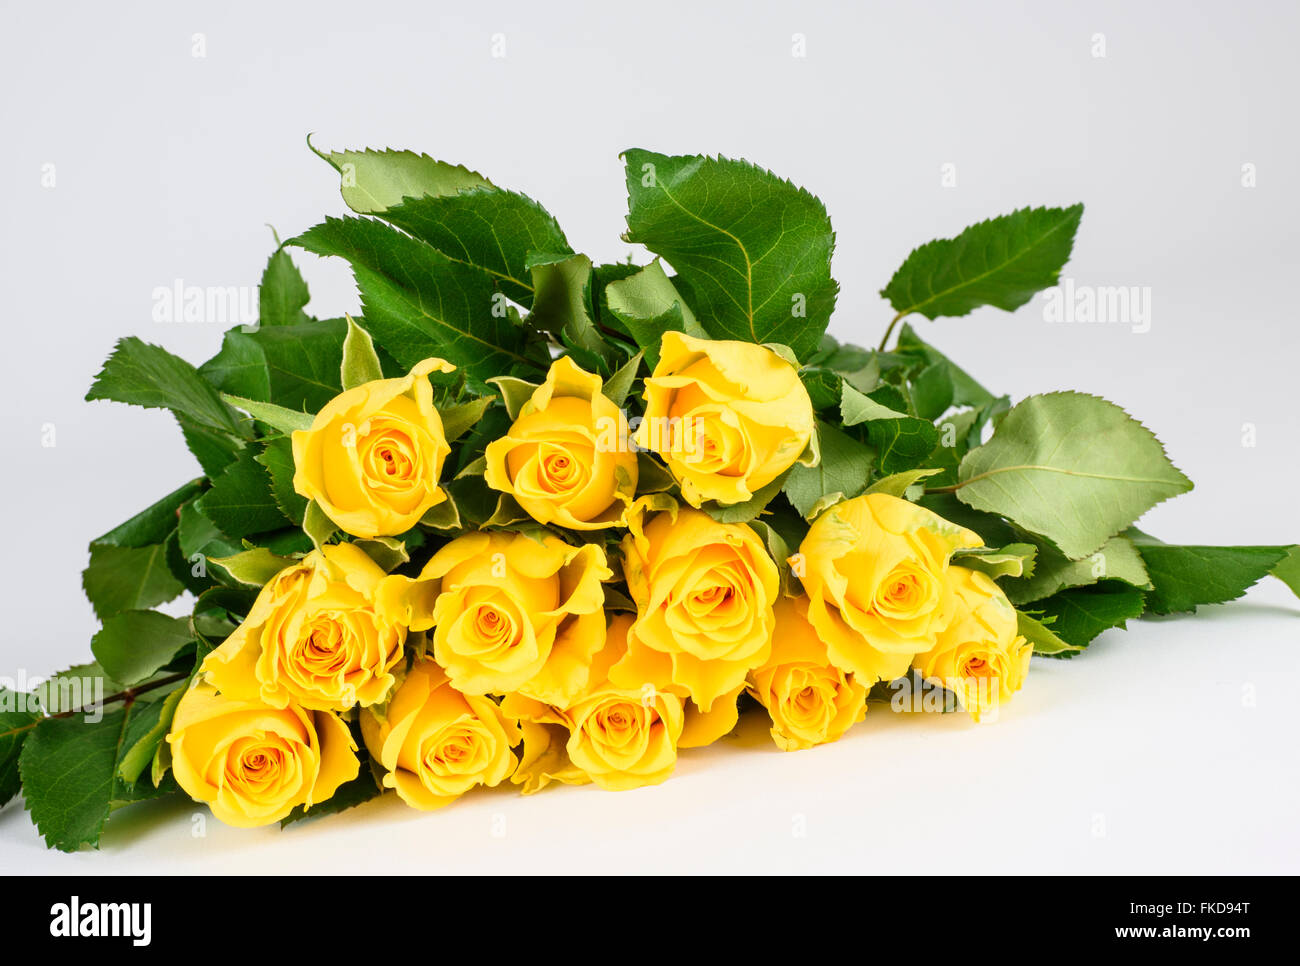 Bunch of fresh yellow roses lying flat on a white surface Stock Photo